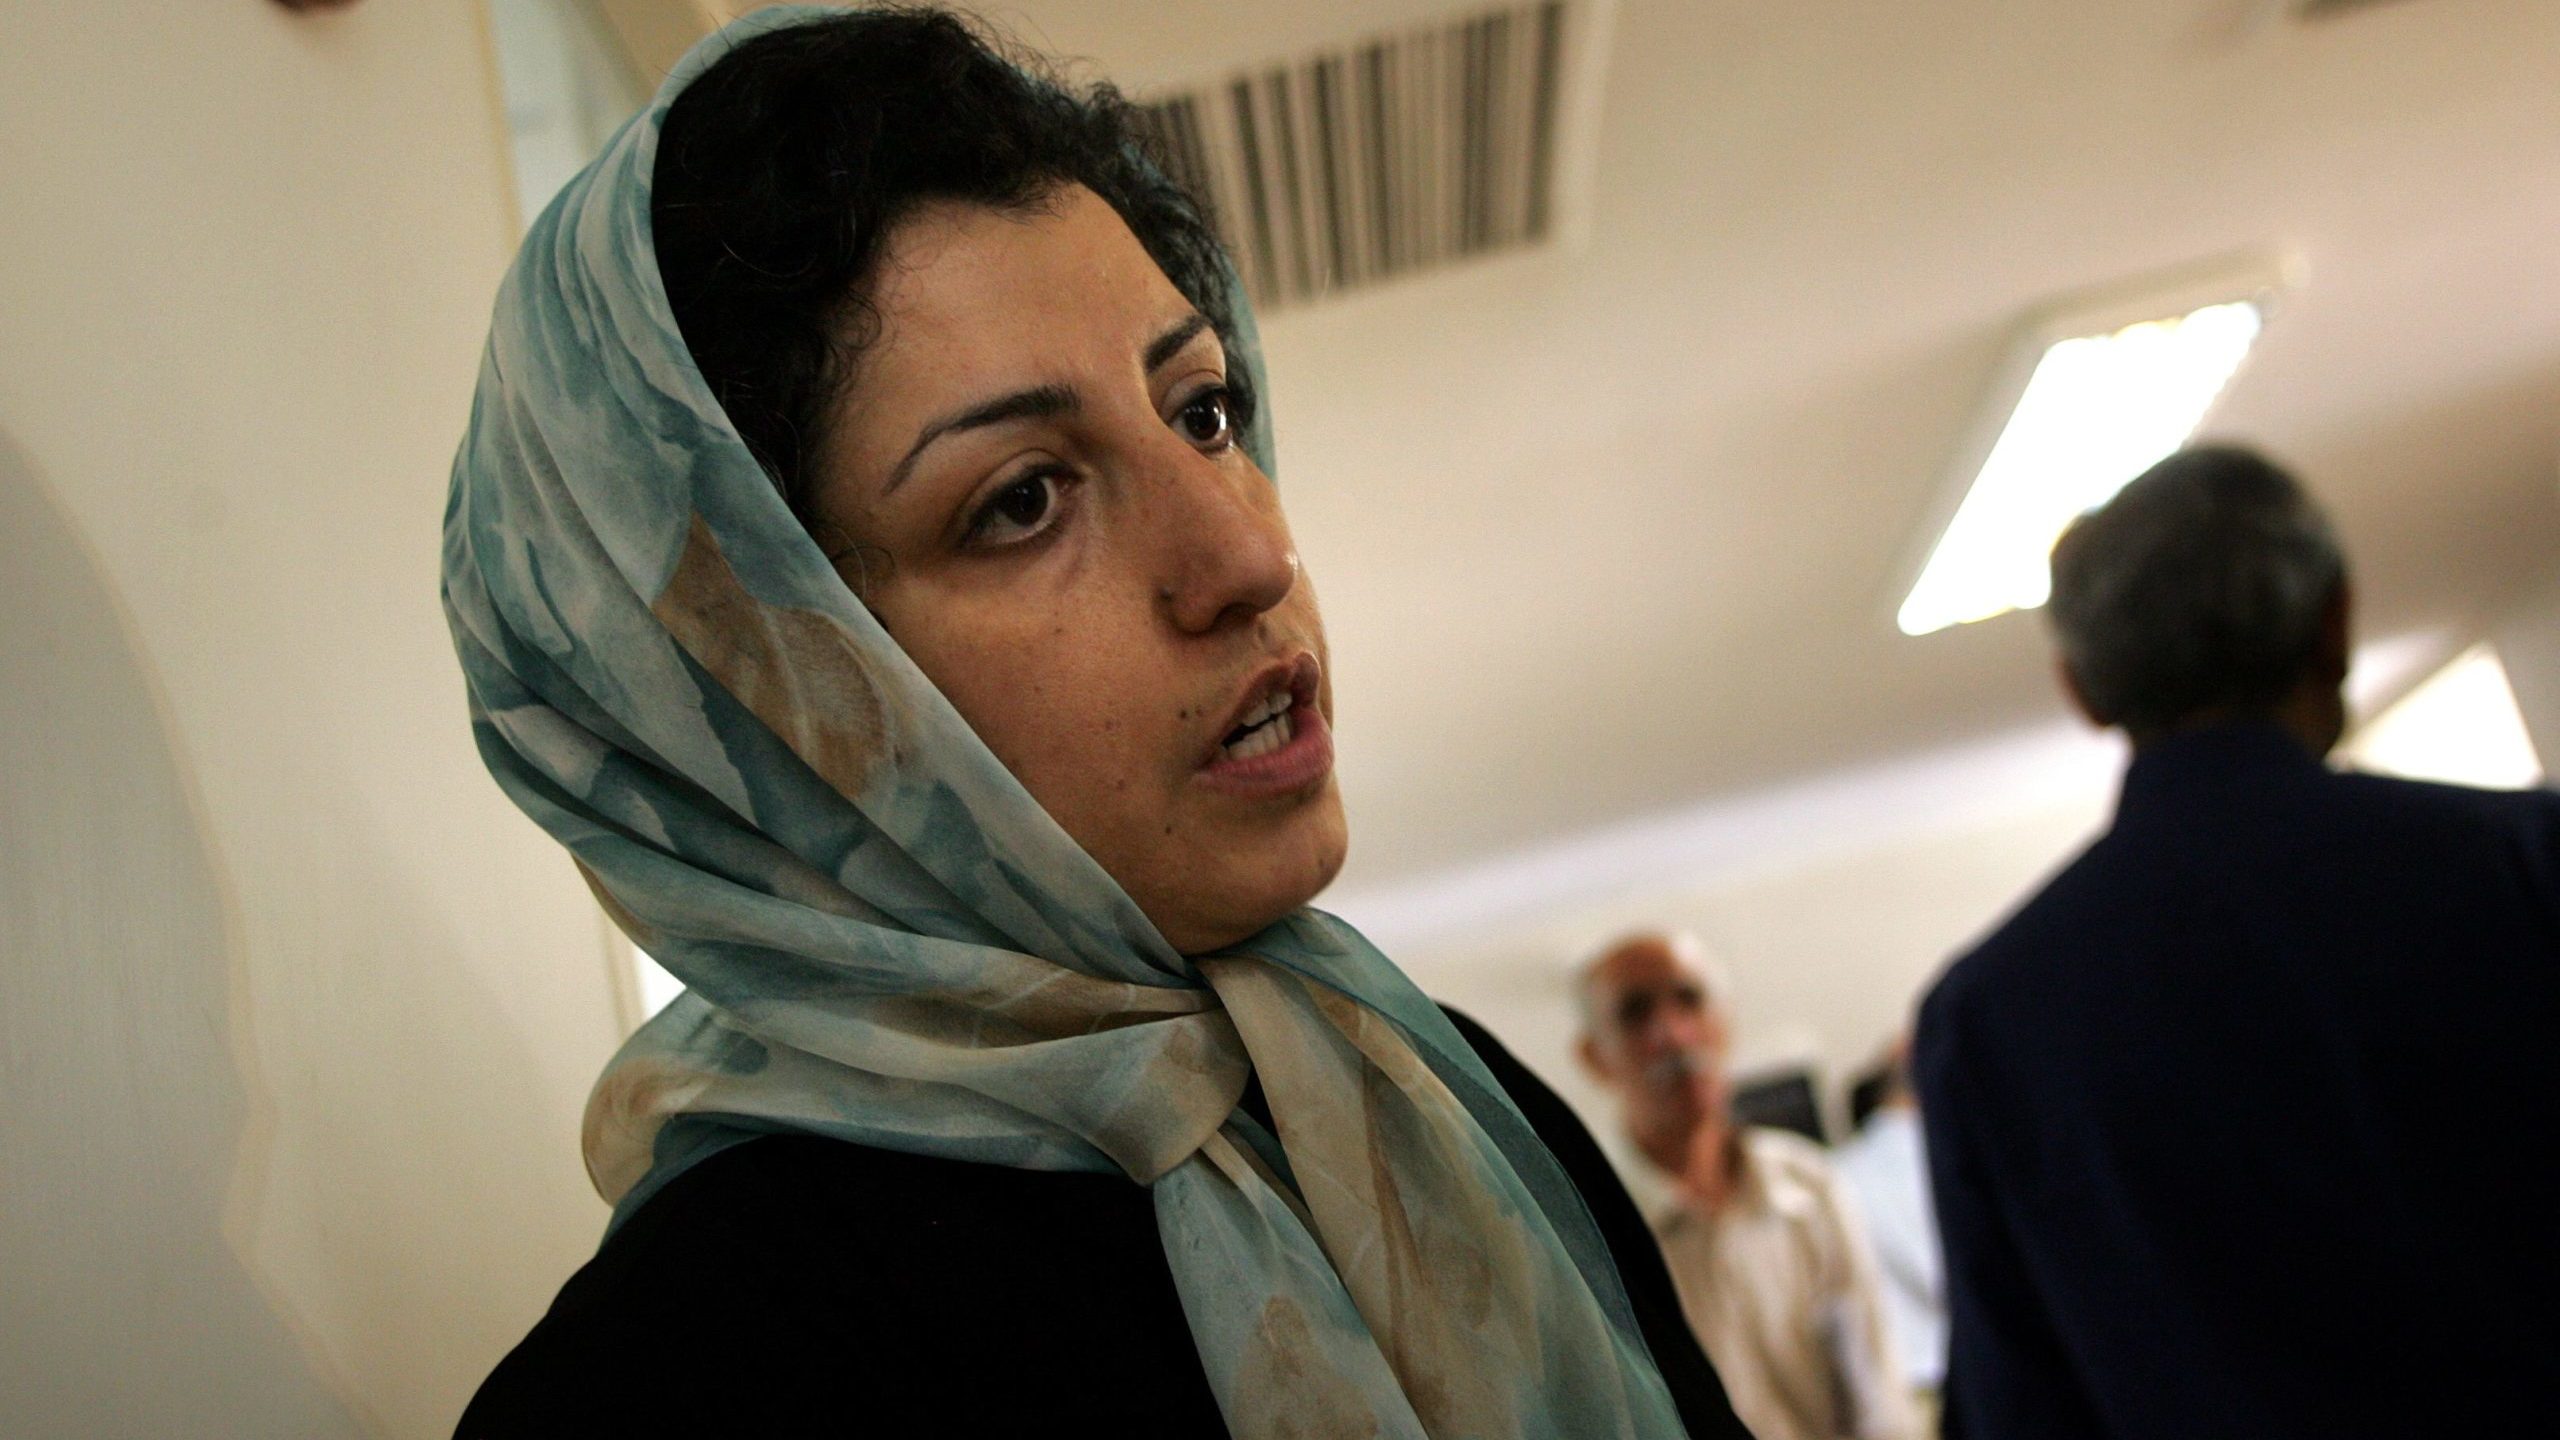 Iranian Human Rights Activist Narges Mohammadi Sentenced to 8 Years in Jail, 70 Lashes